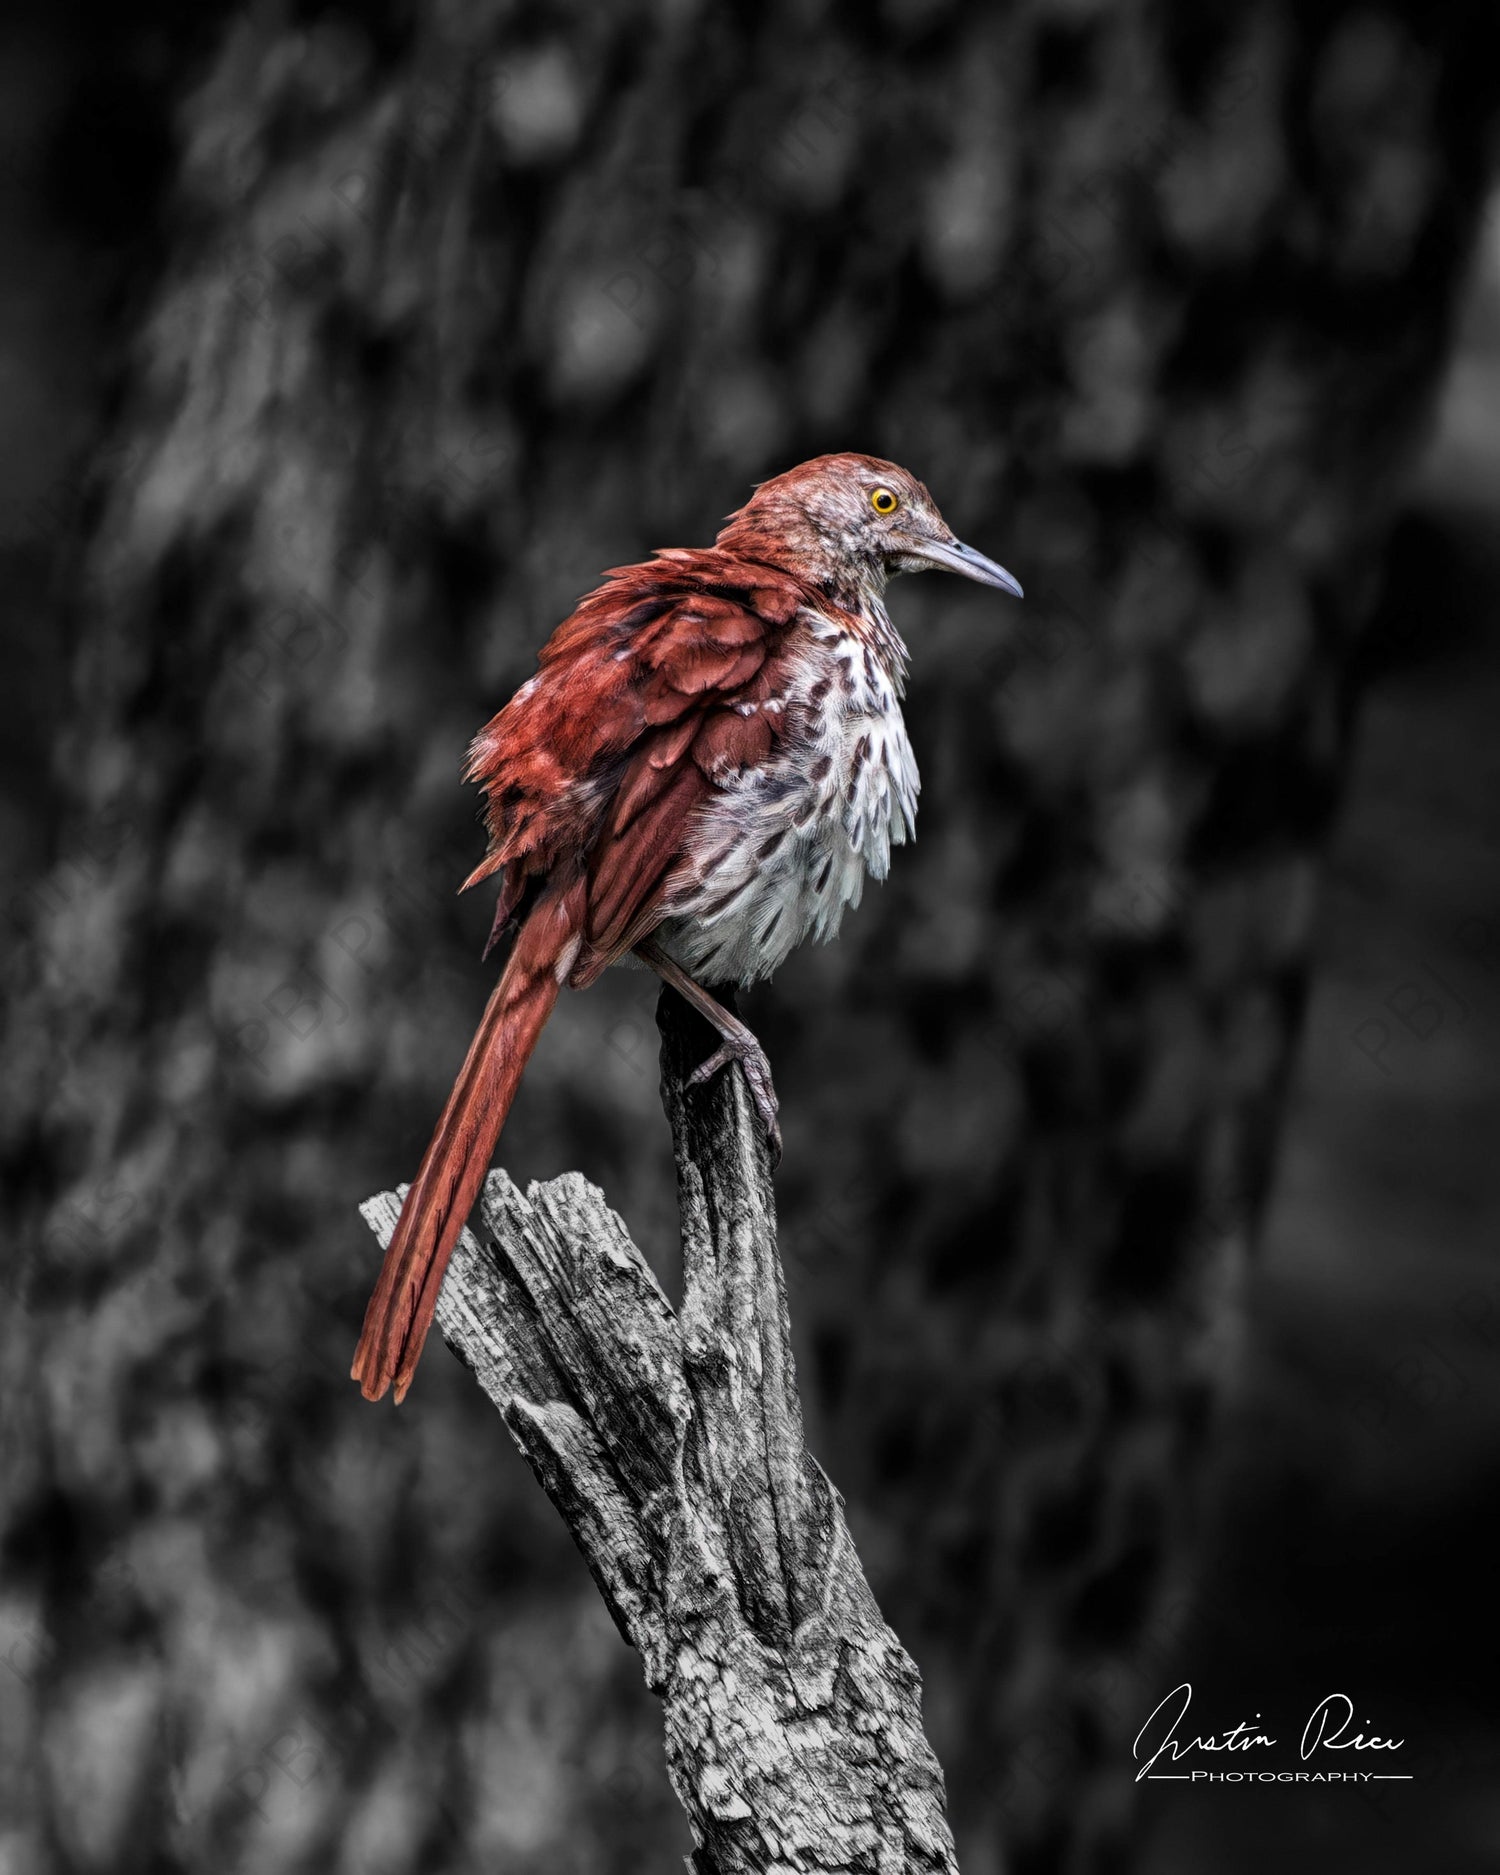 Brown Thrasher Post-Preen - Artist by Justin Rice - Art Prints, Decoupage Rice Paper, Flat Canvas Prints, Giclee Prints, Photo Prints, Poster Prints